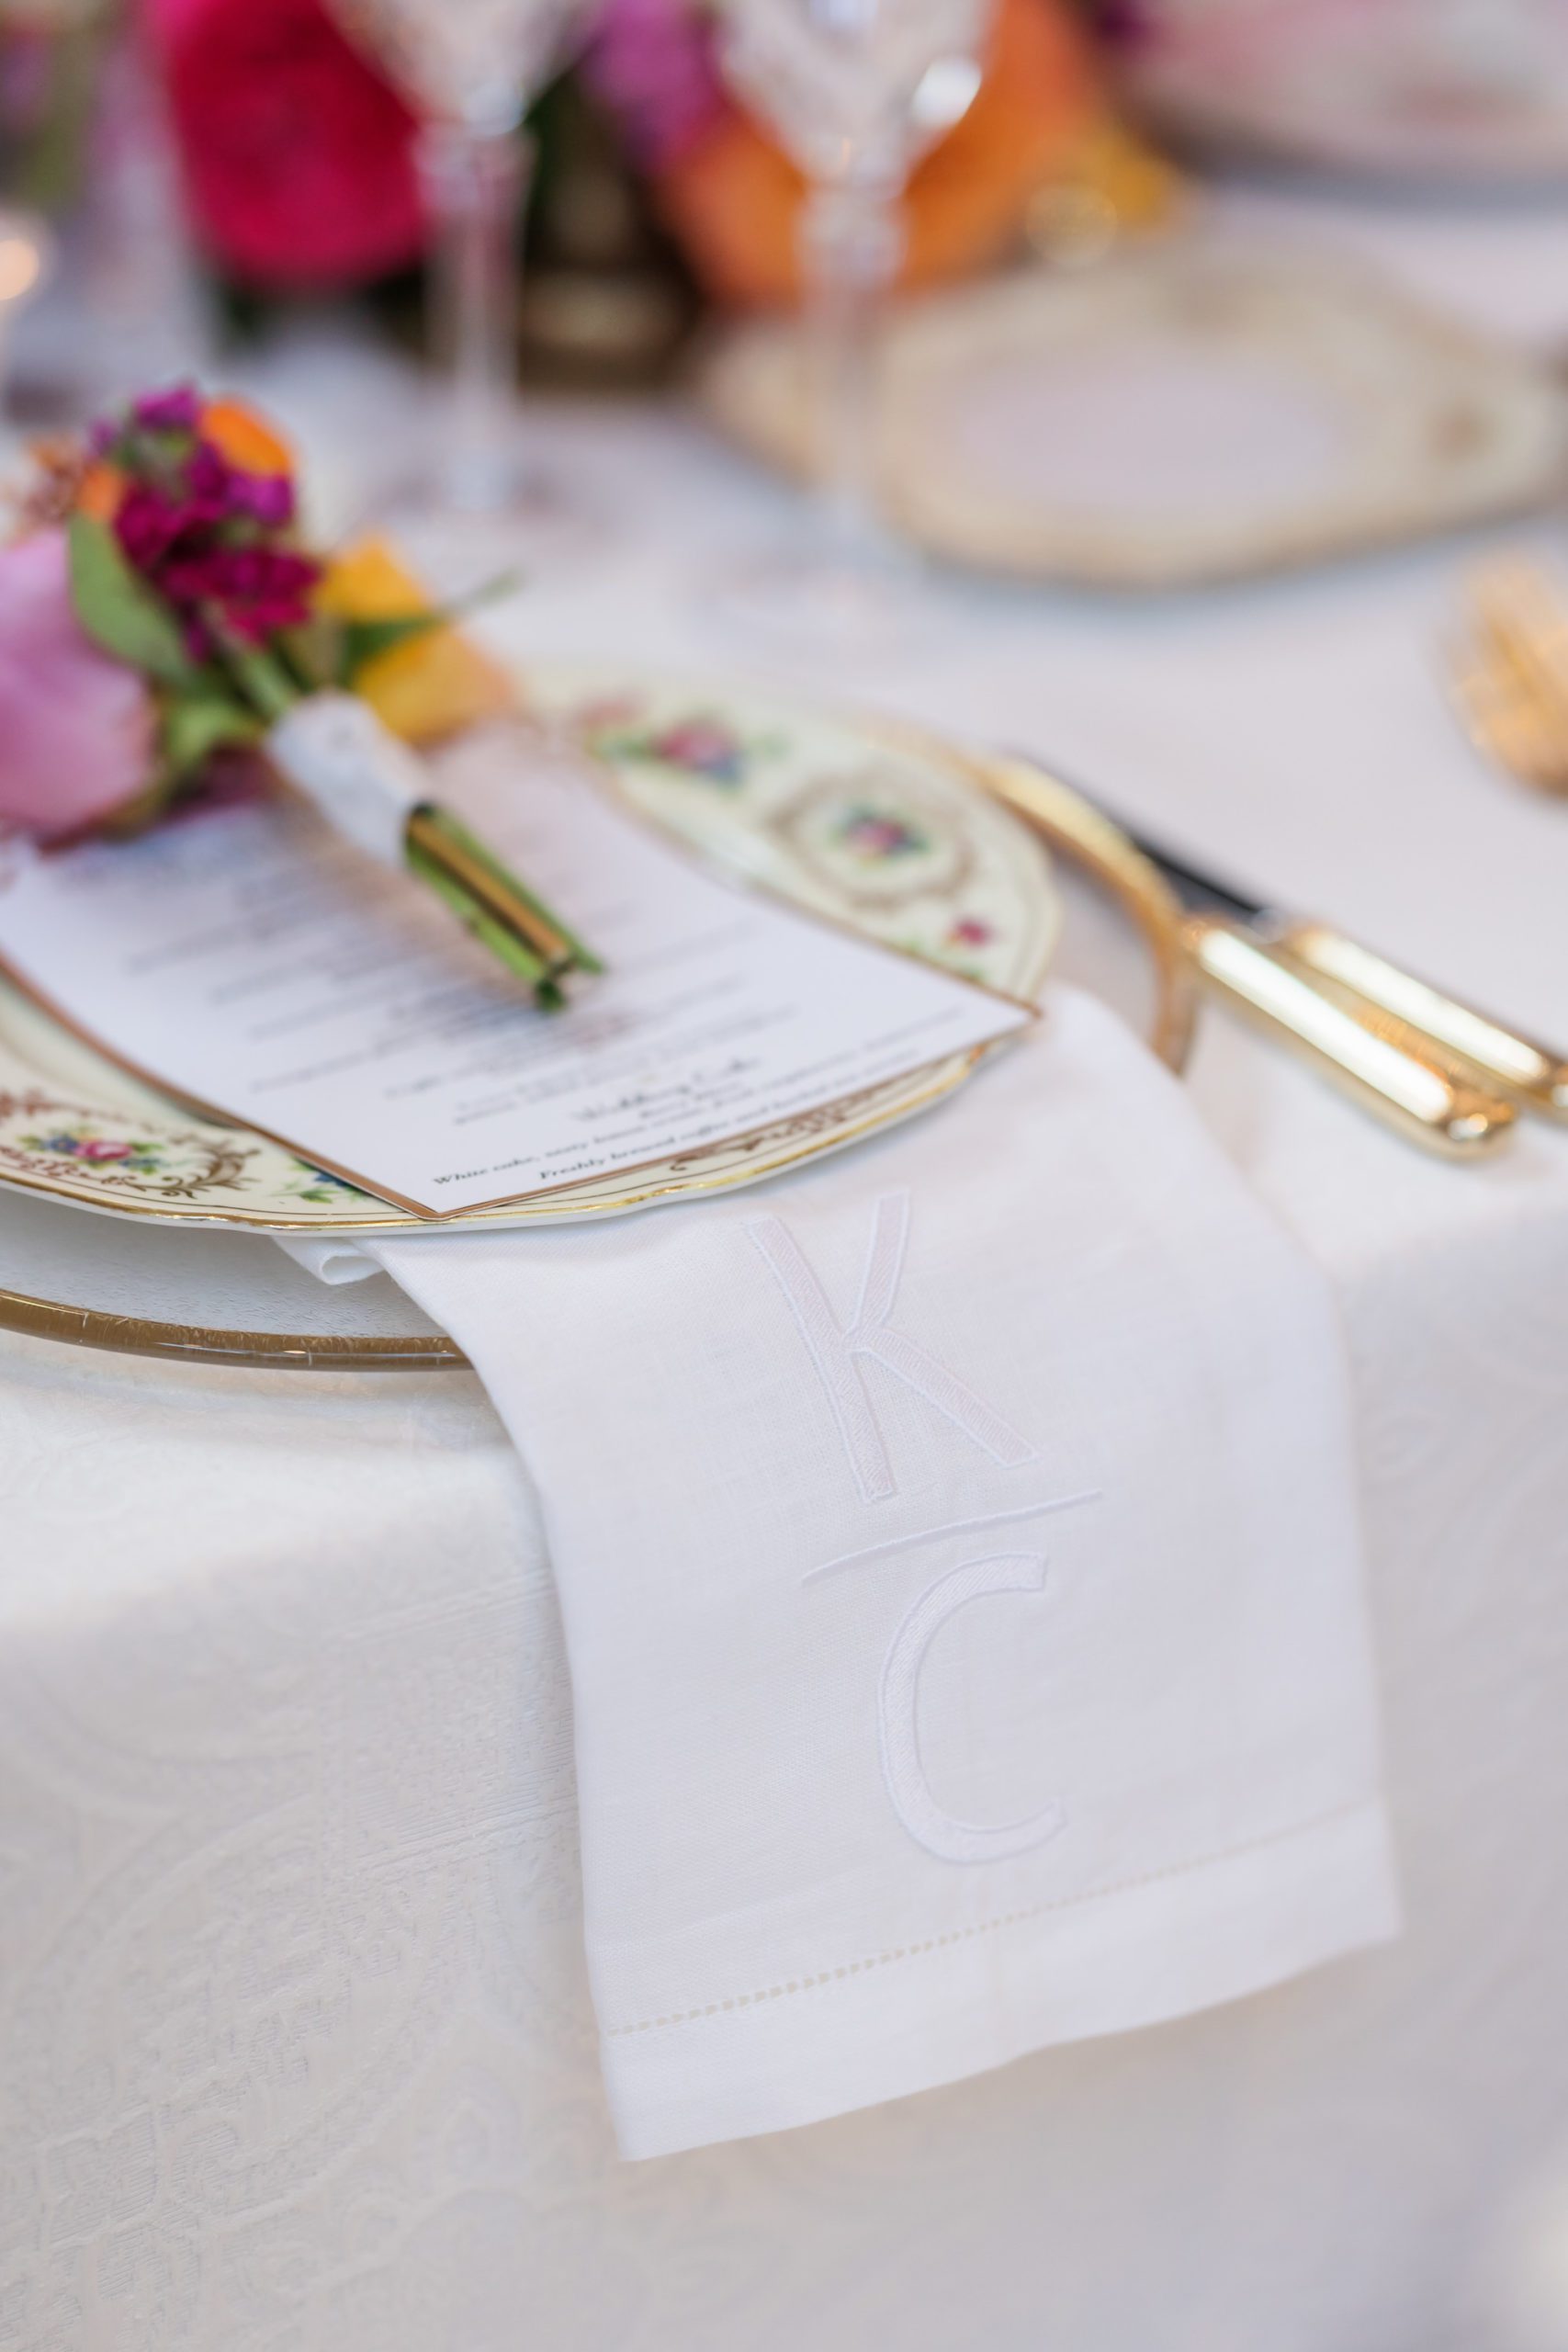 long napkins and white and gold plates